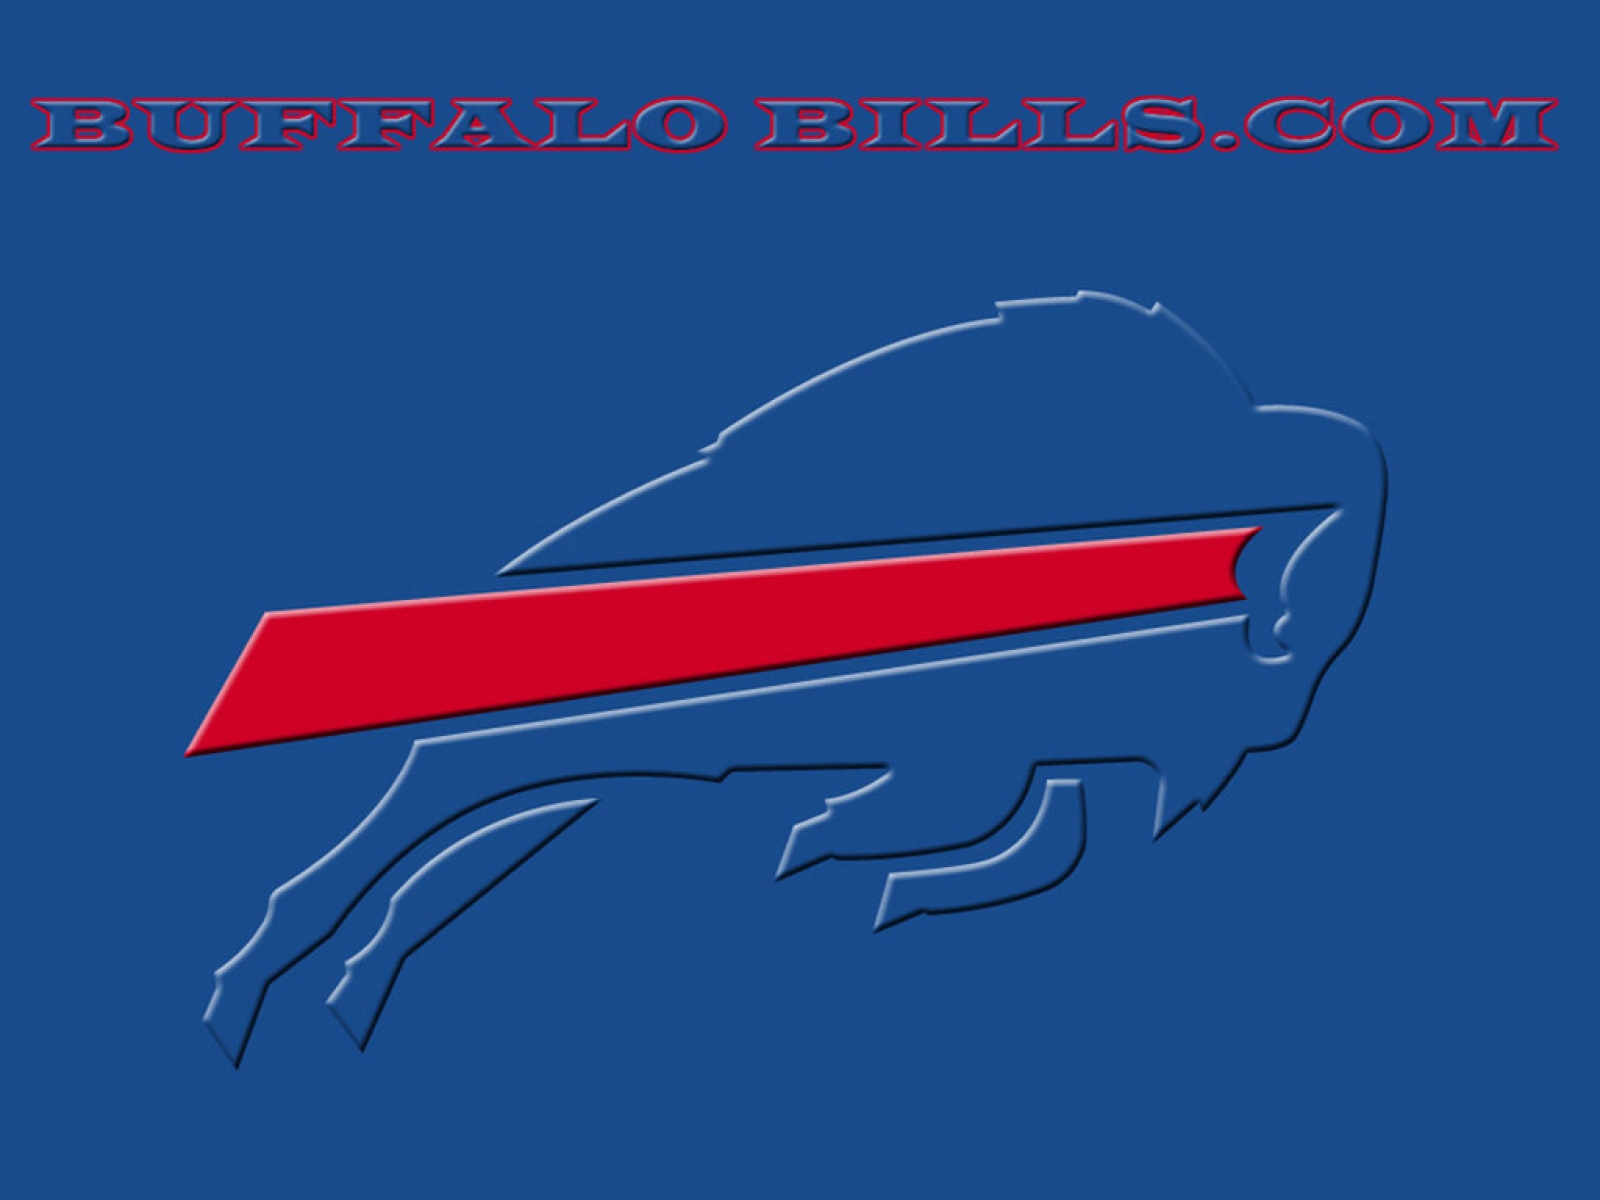 You Like This Buffalo Bills Wallpaper HD Background As Much We